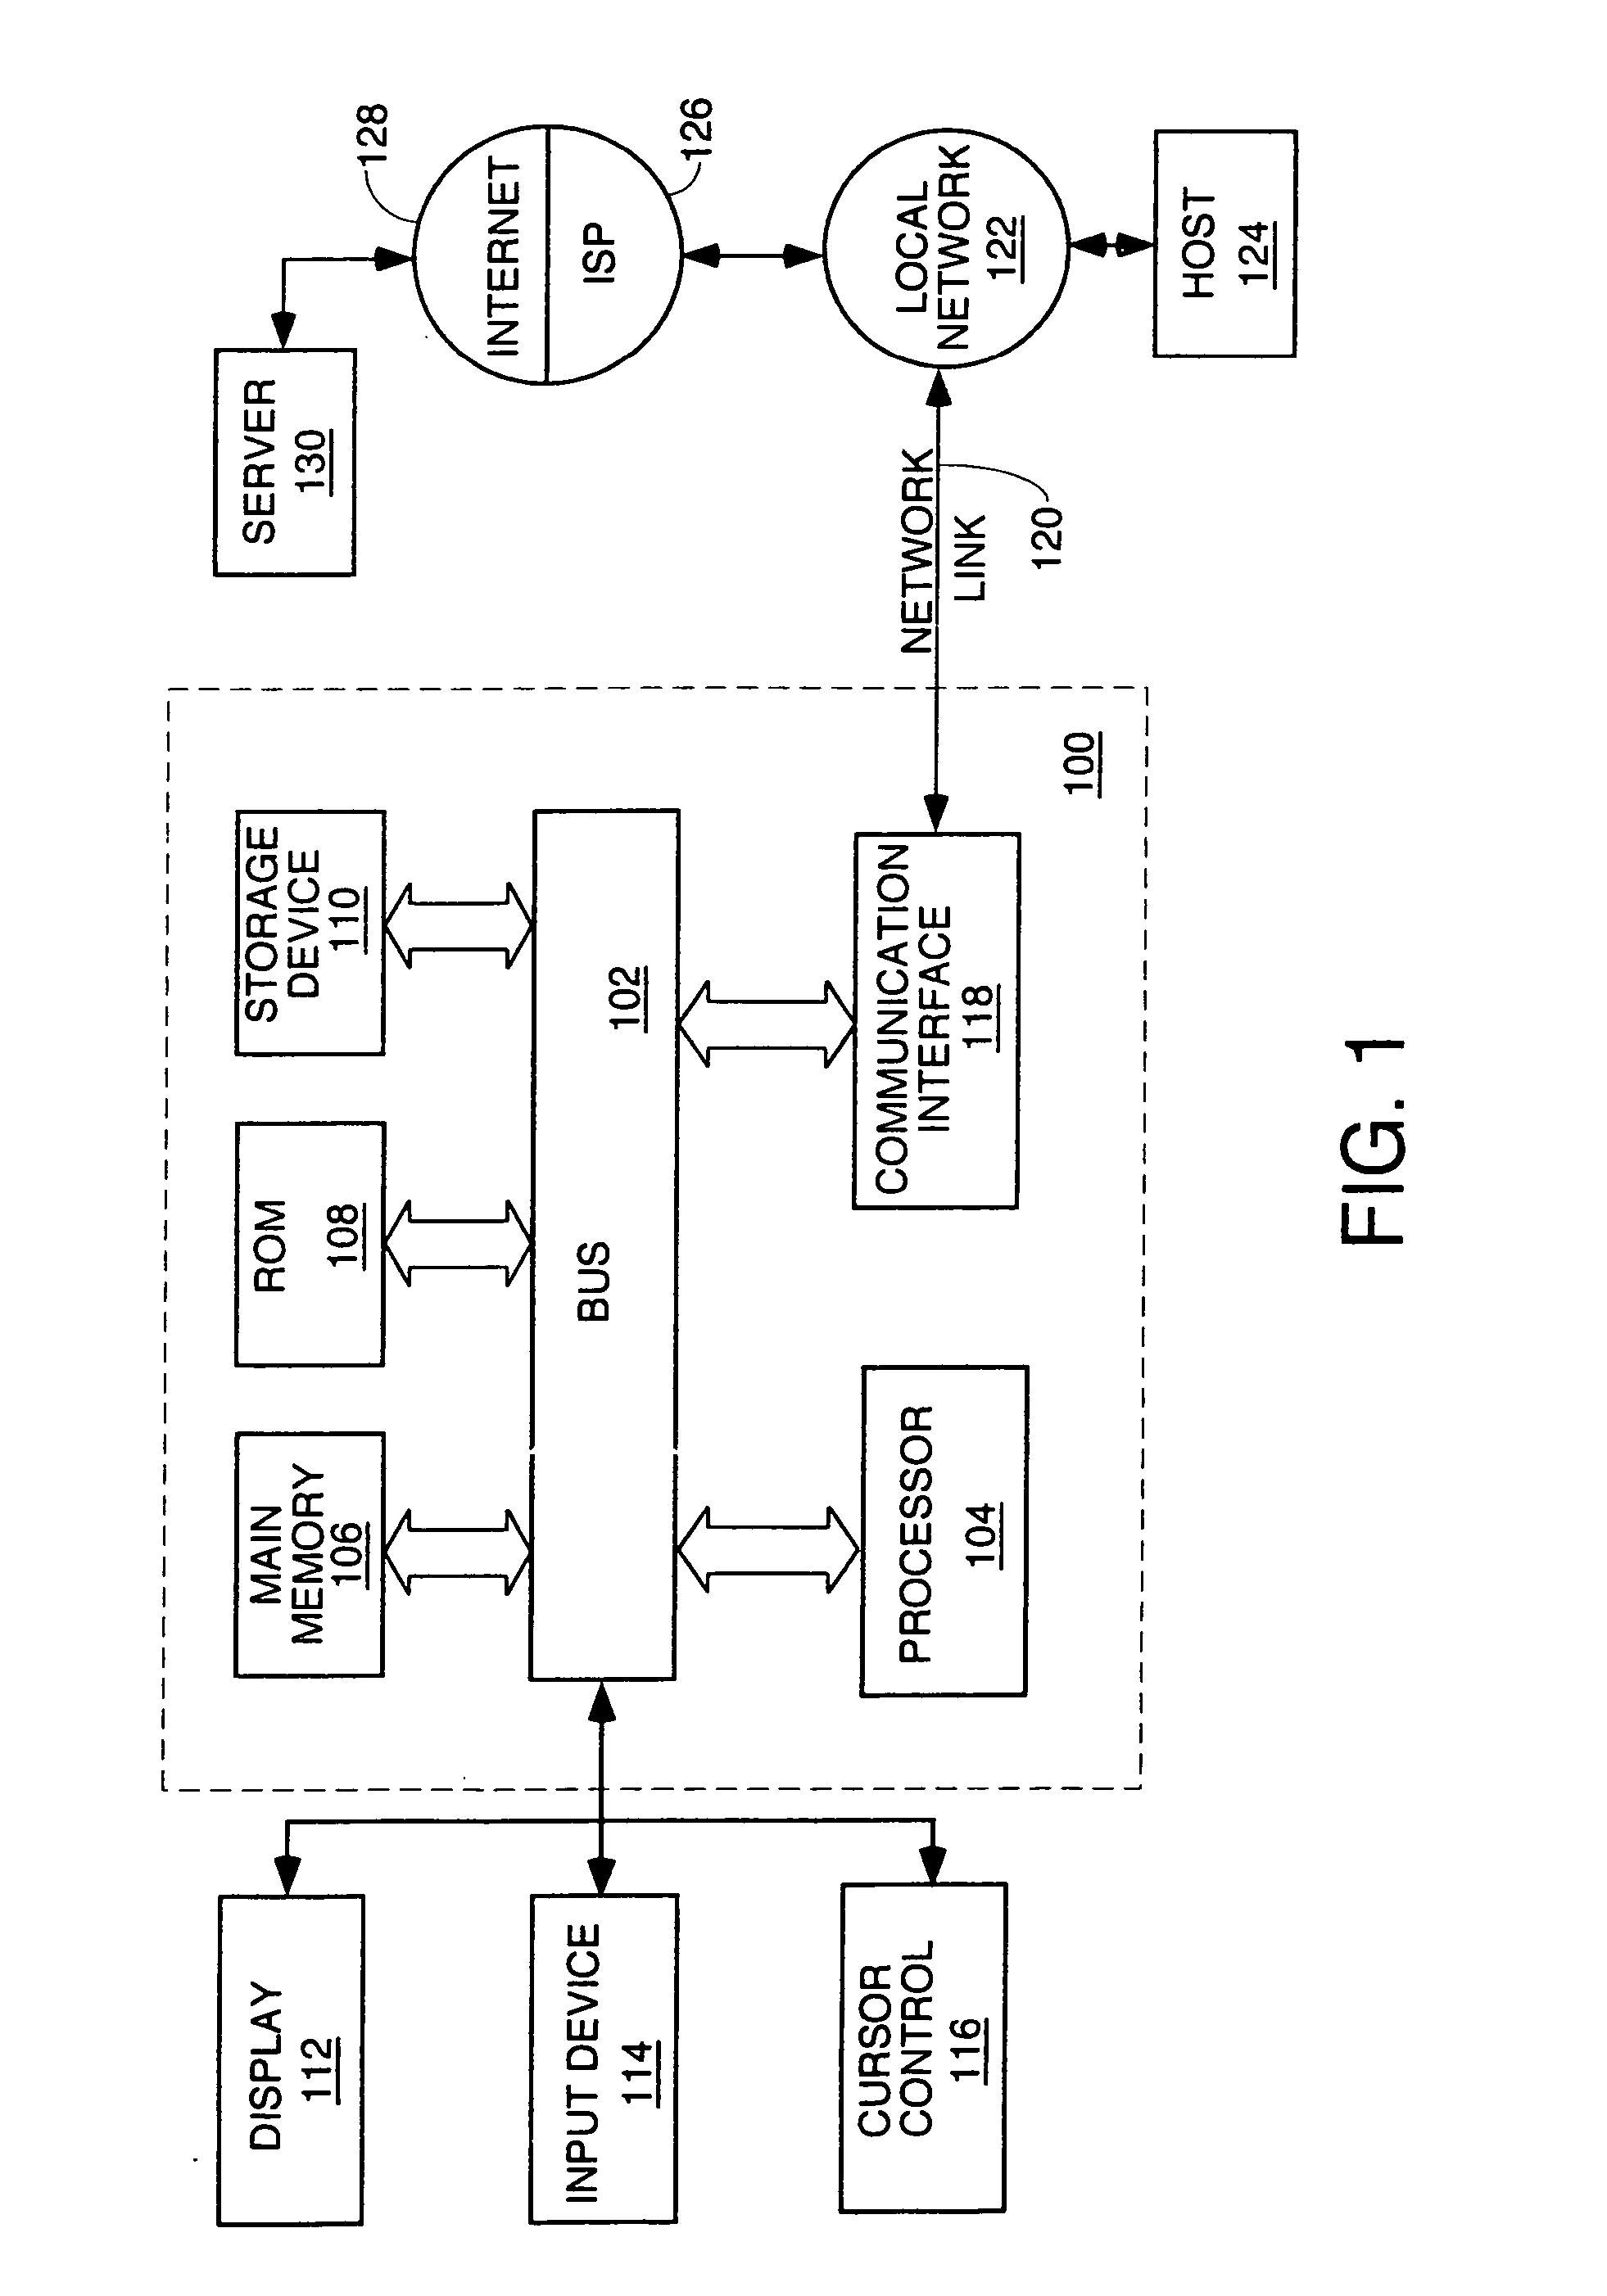 Process for gathering and special data structure for storing performance metric data